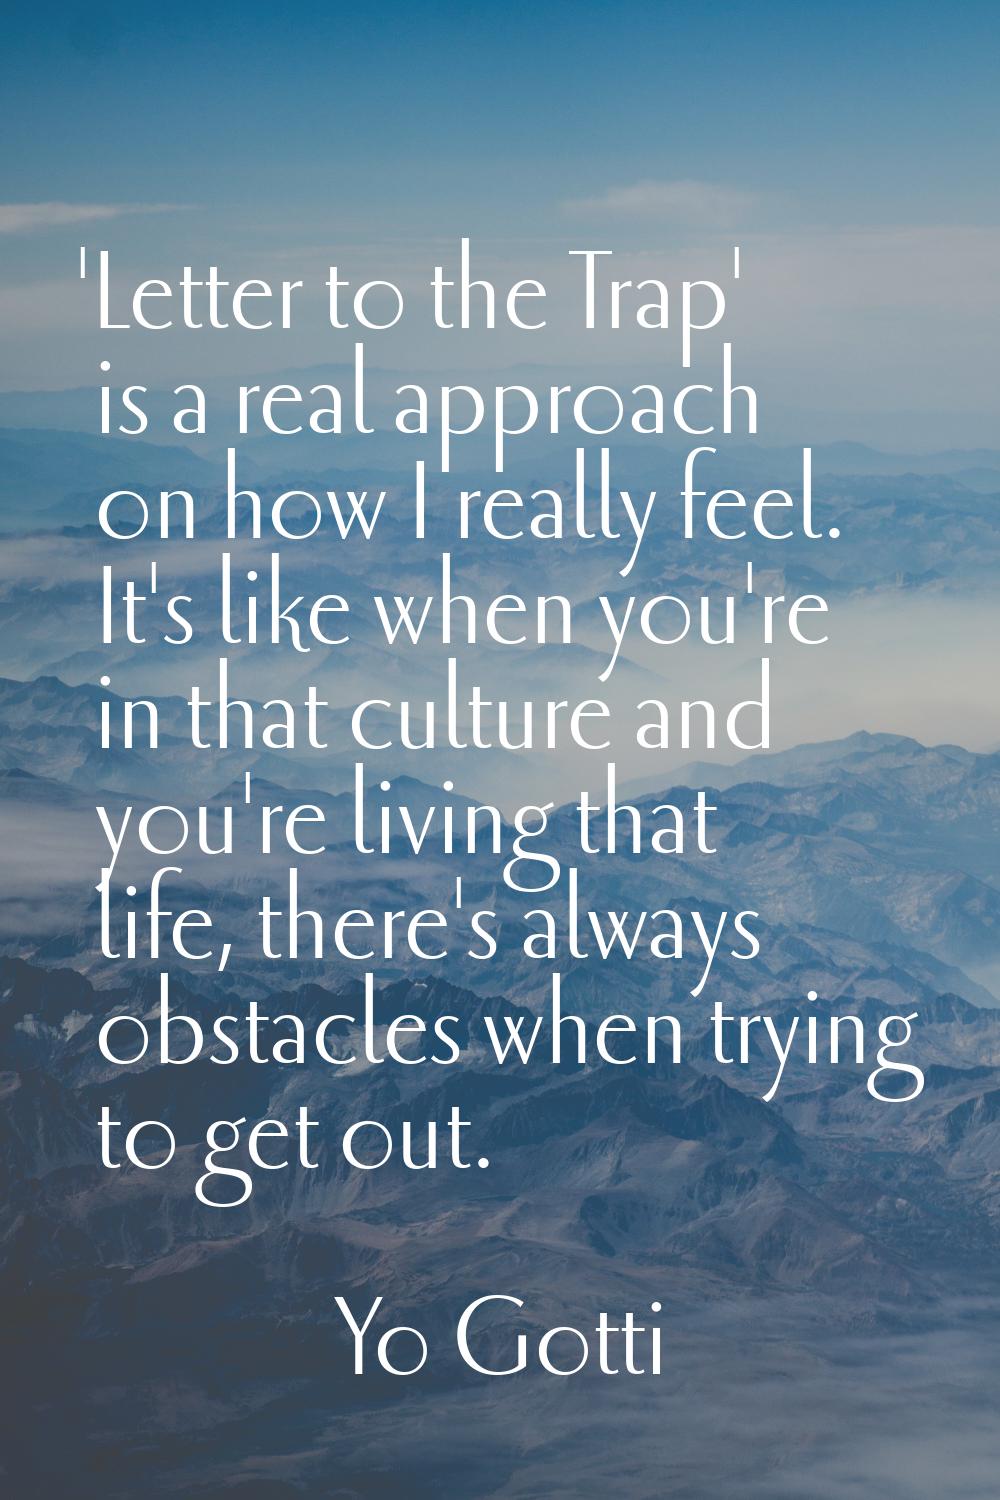 'Letter to the Trap' is a real approach on how I really feel. It's like when you're in that culture